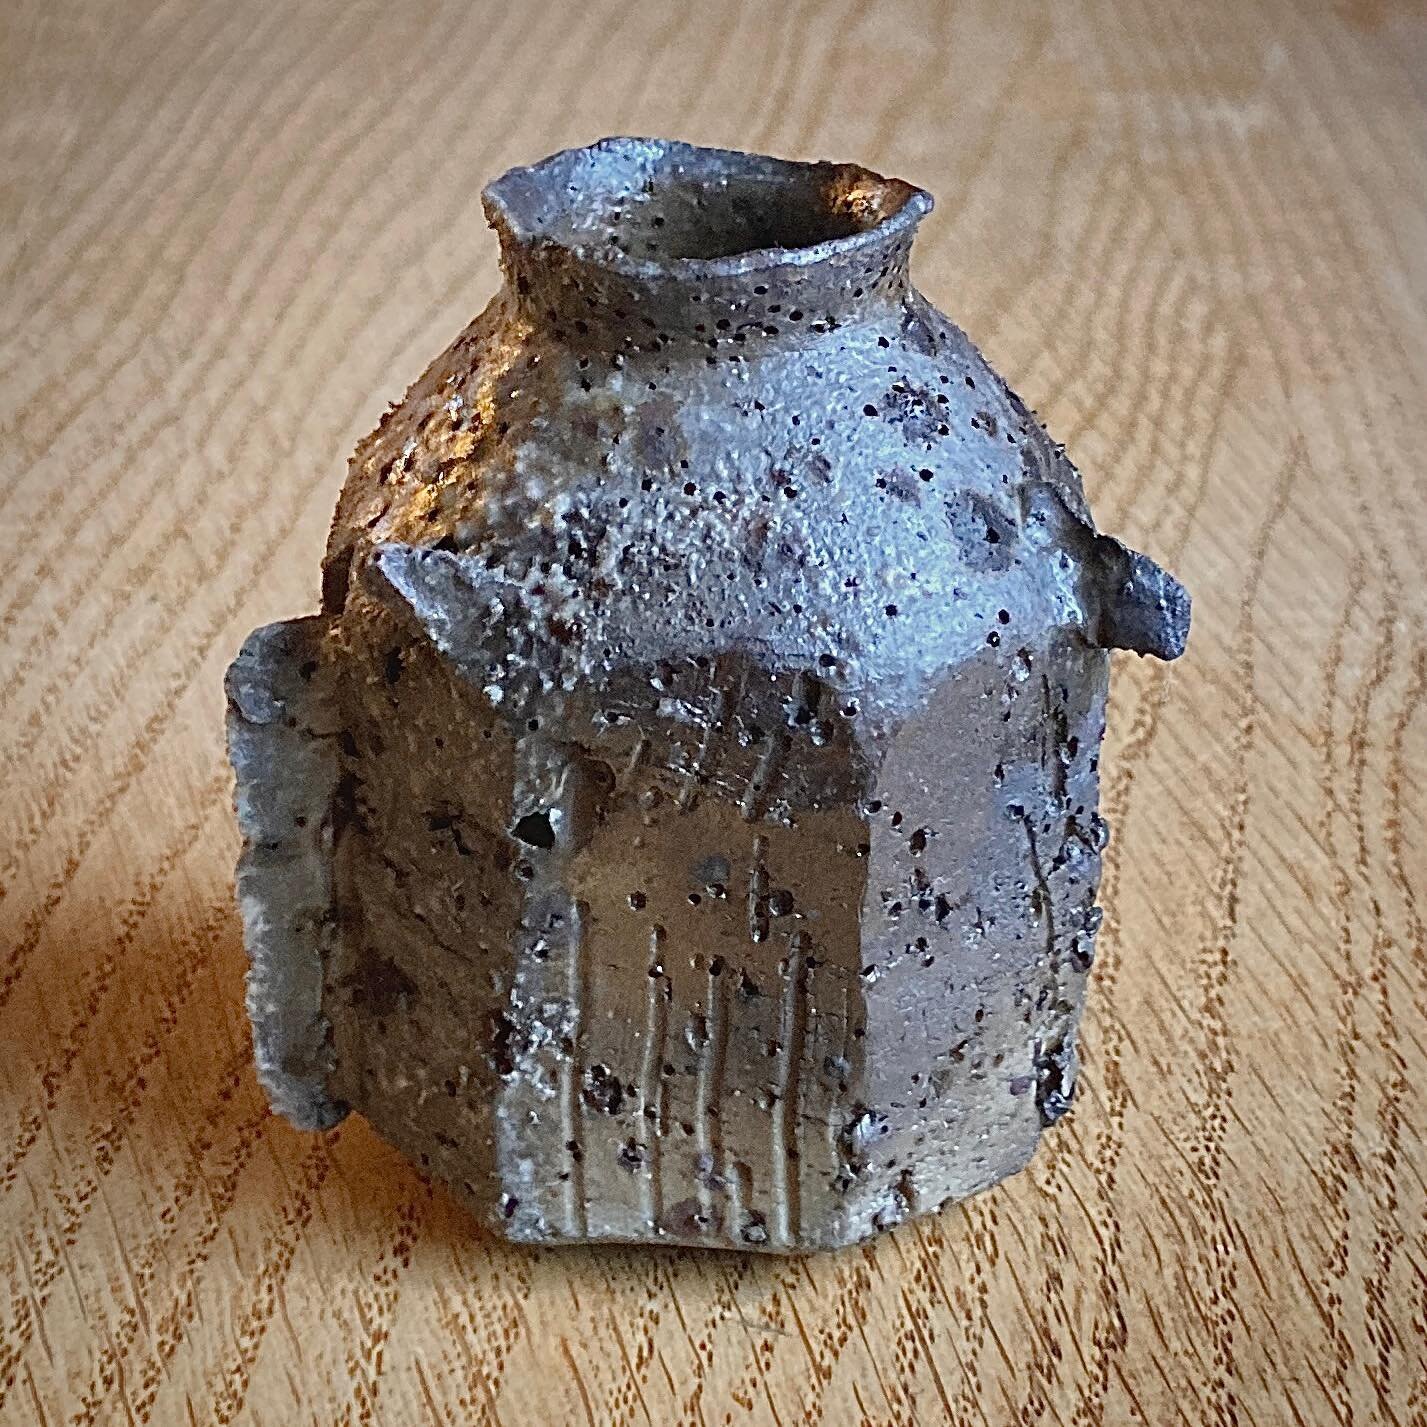 Two years ago, and just two weeks before I contracted covid-19 (later to escalate into long covid chronic fatigue), I hopefully made this little porcelain bottle.
.
Intended for my own tiny experimental wood kiln (which I never did fire), she sat bis